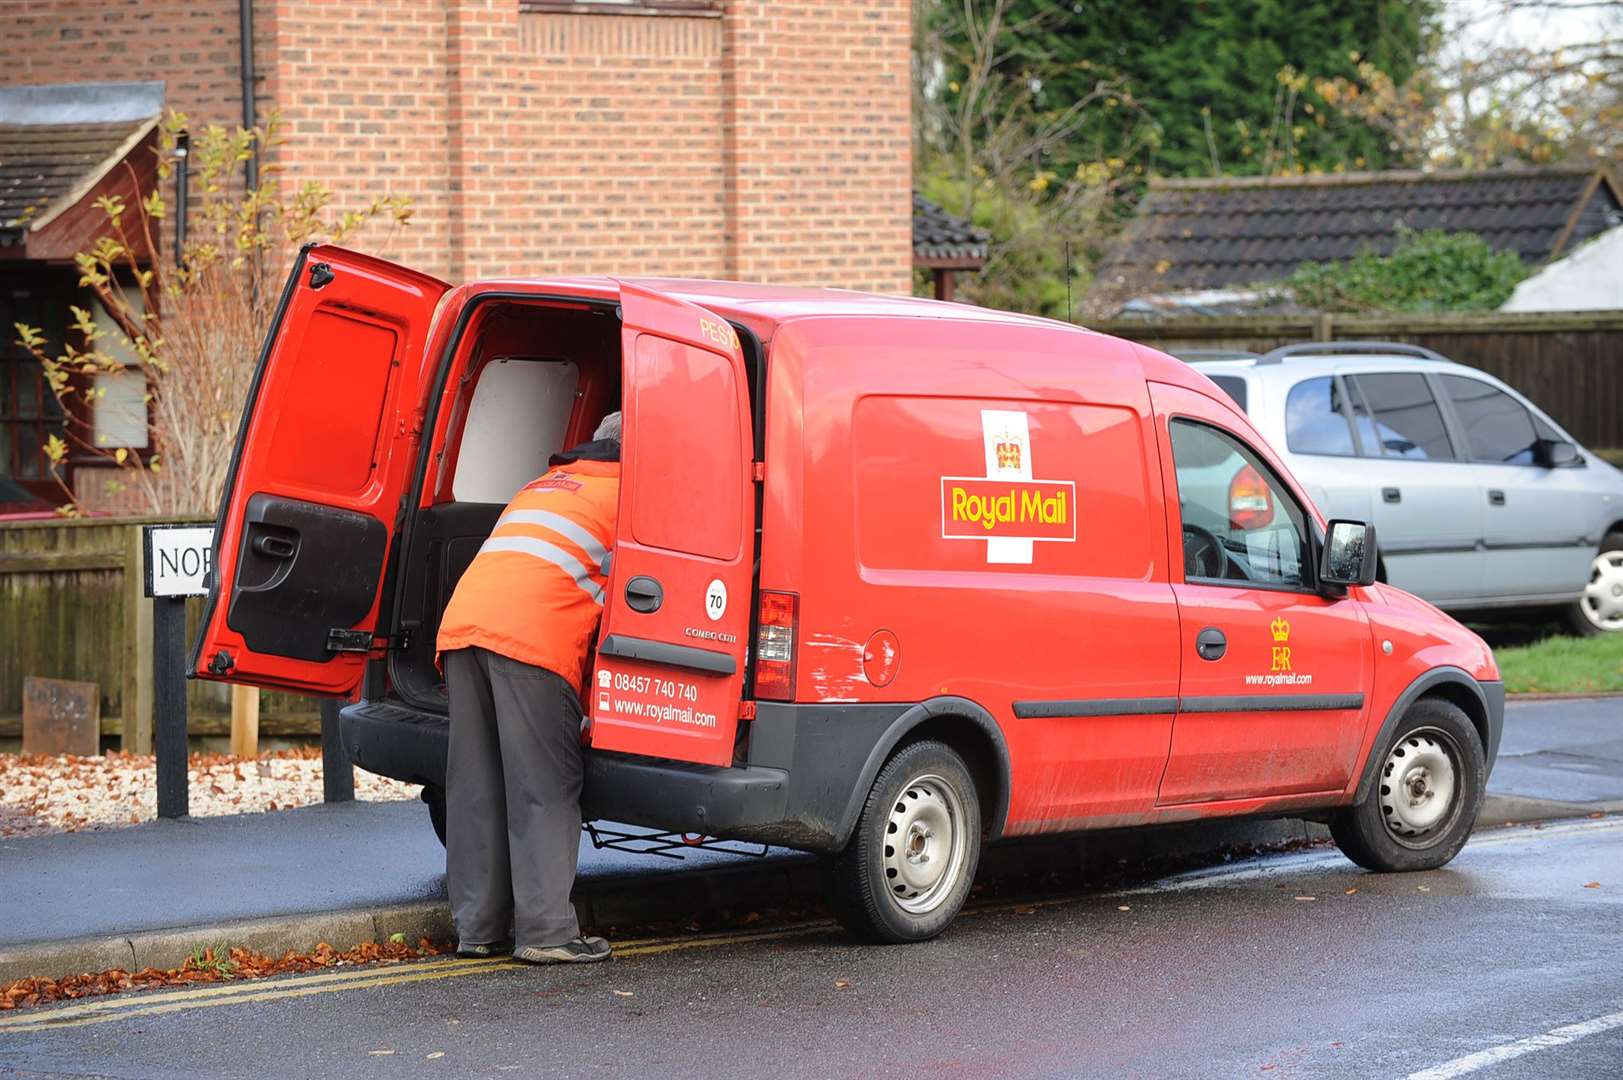 Postal workers say there is not adequate social distancing and PPE in place for staff